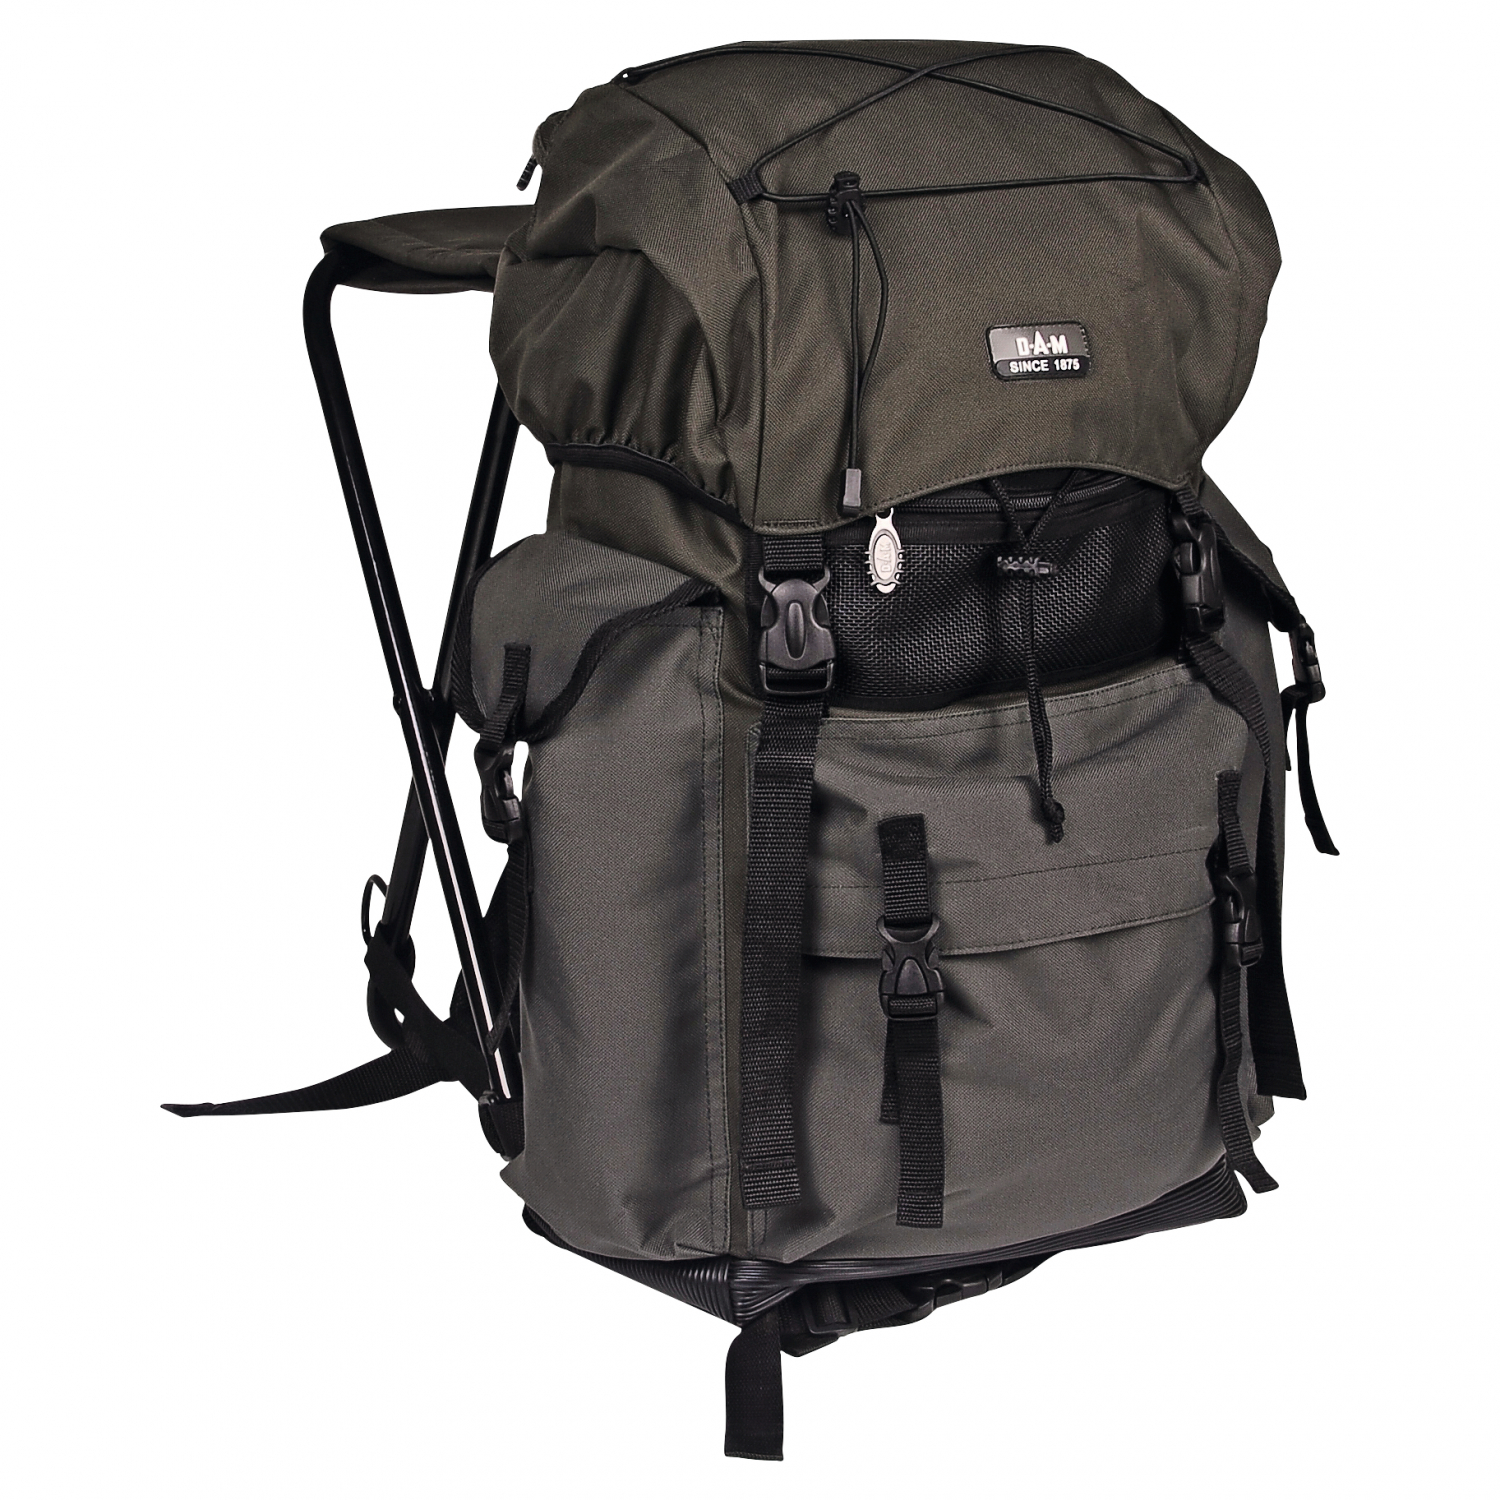 DAM Angler backpack with chair 